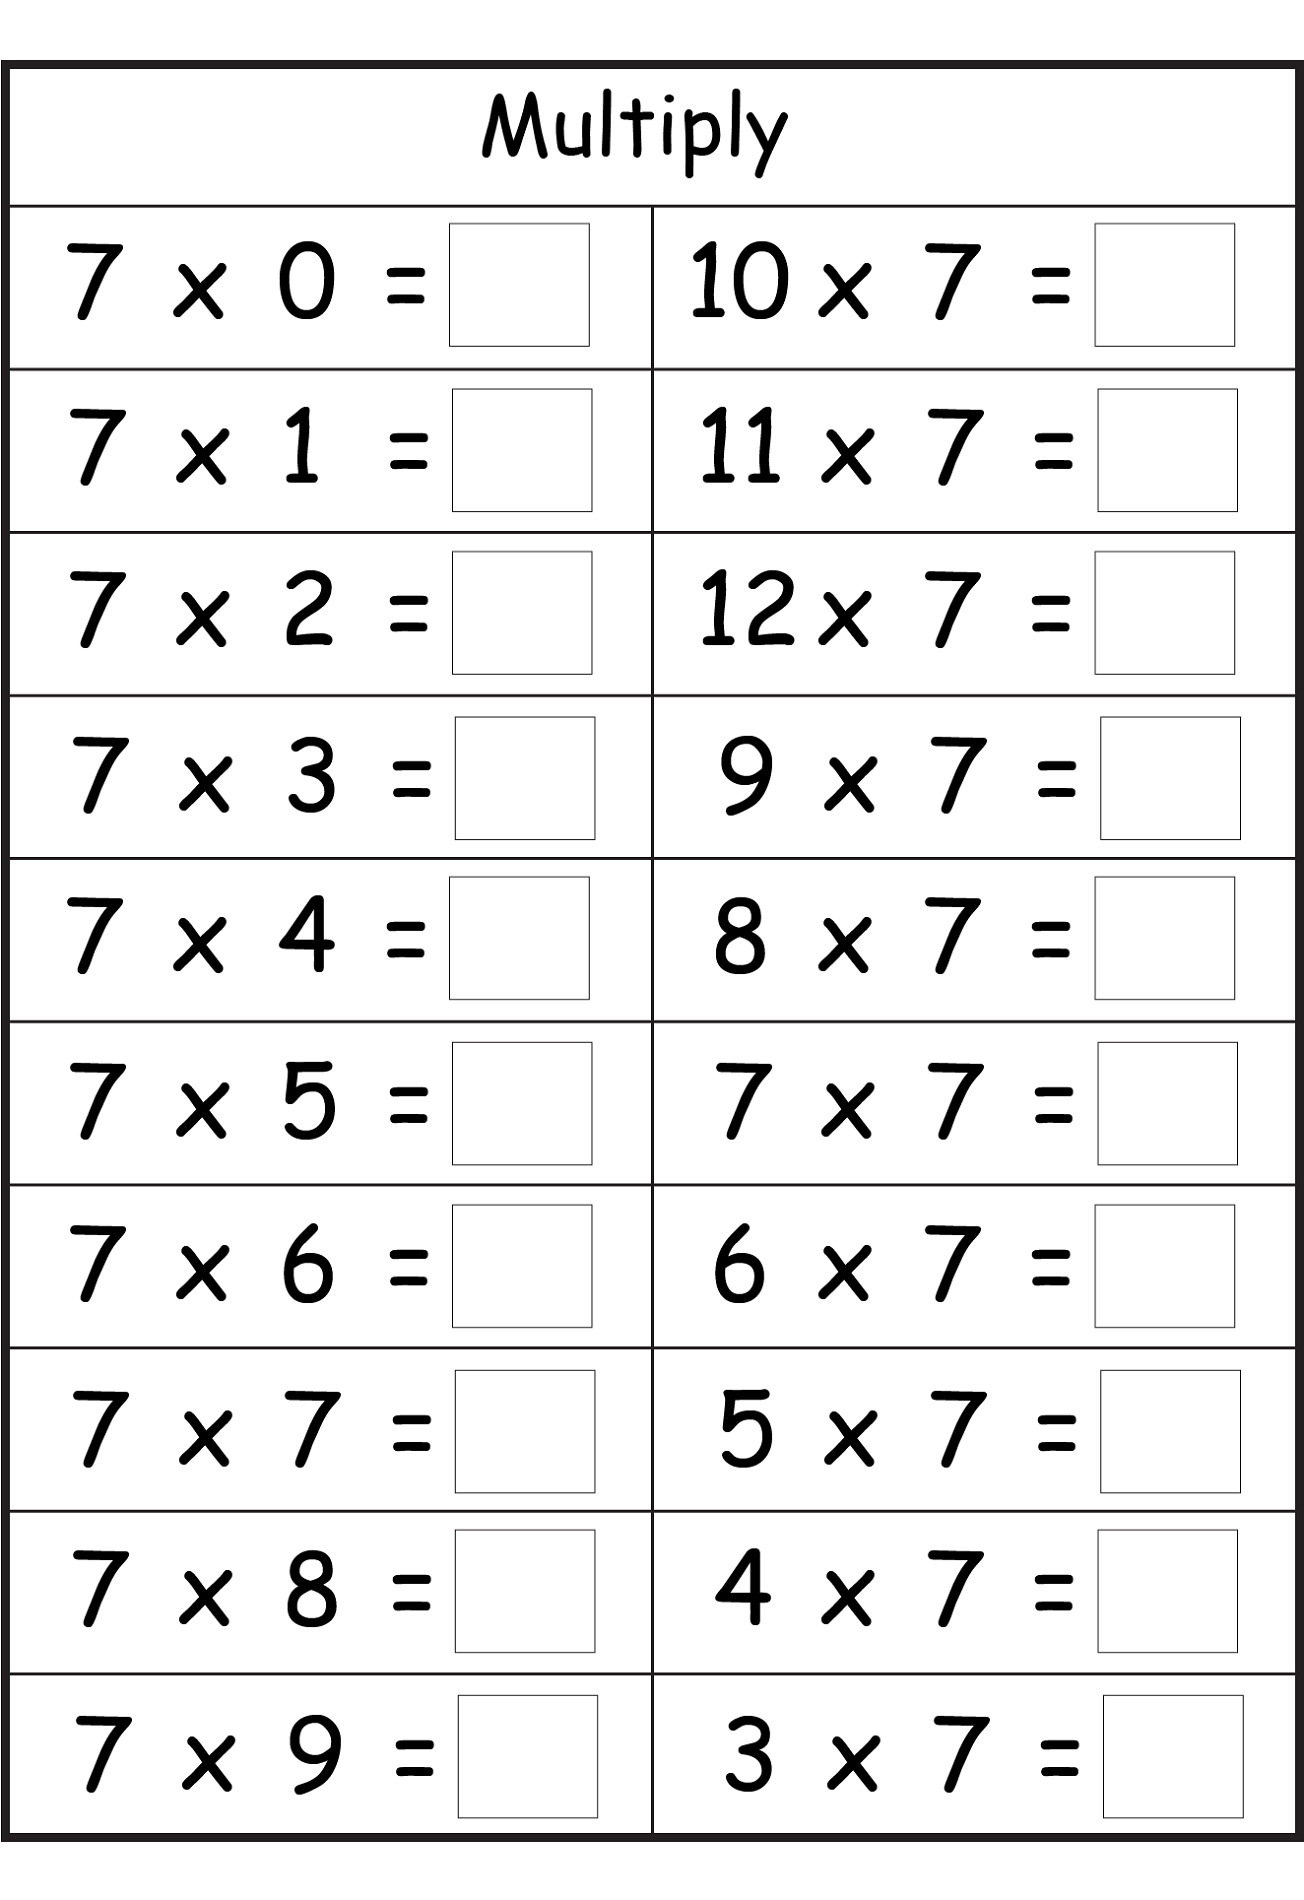 Times Table Worksheets To Print